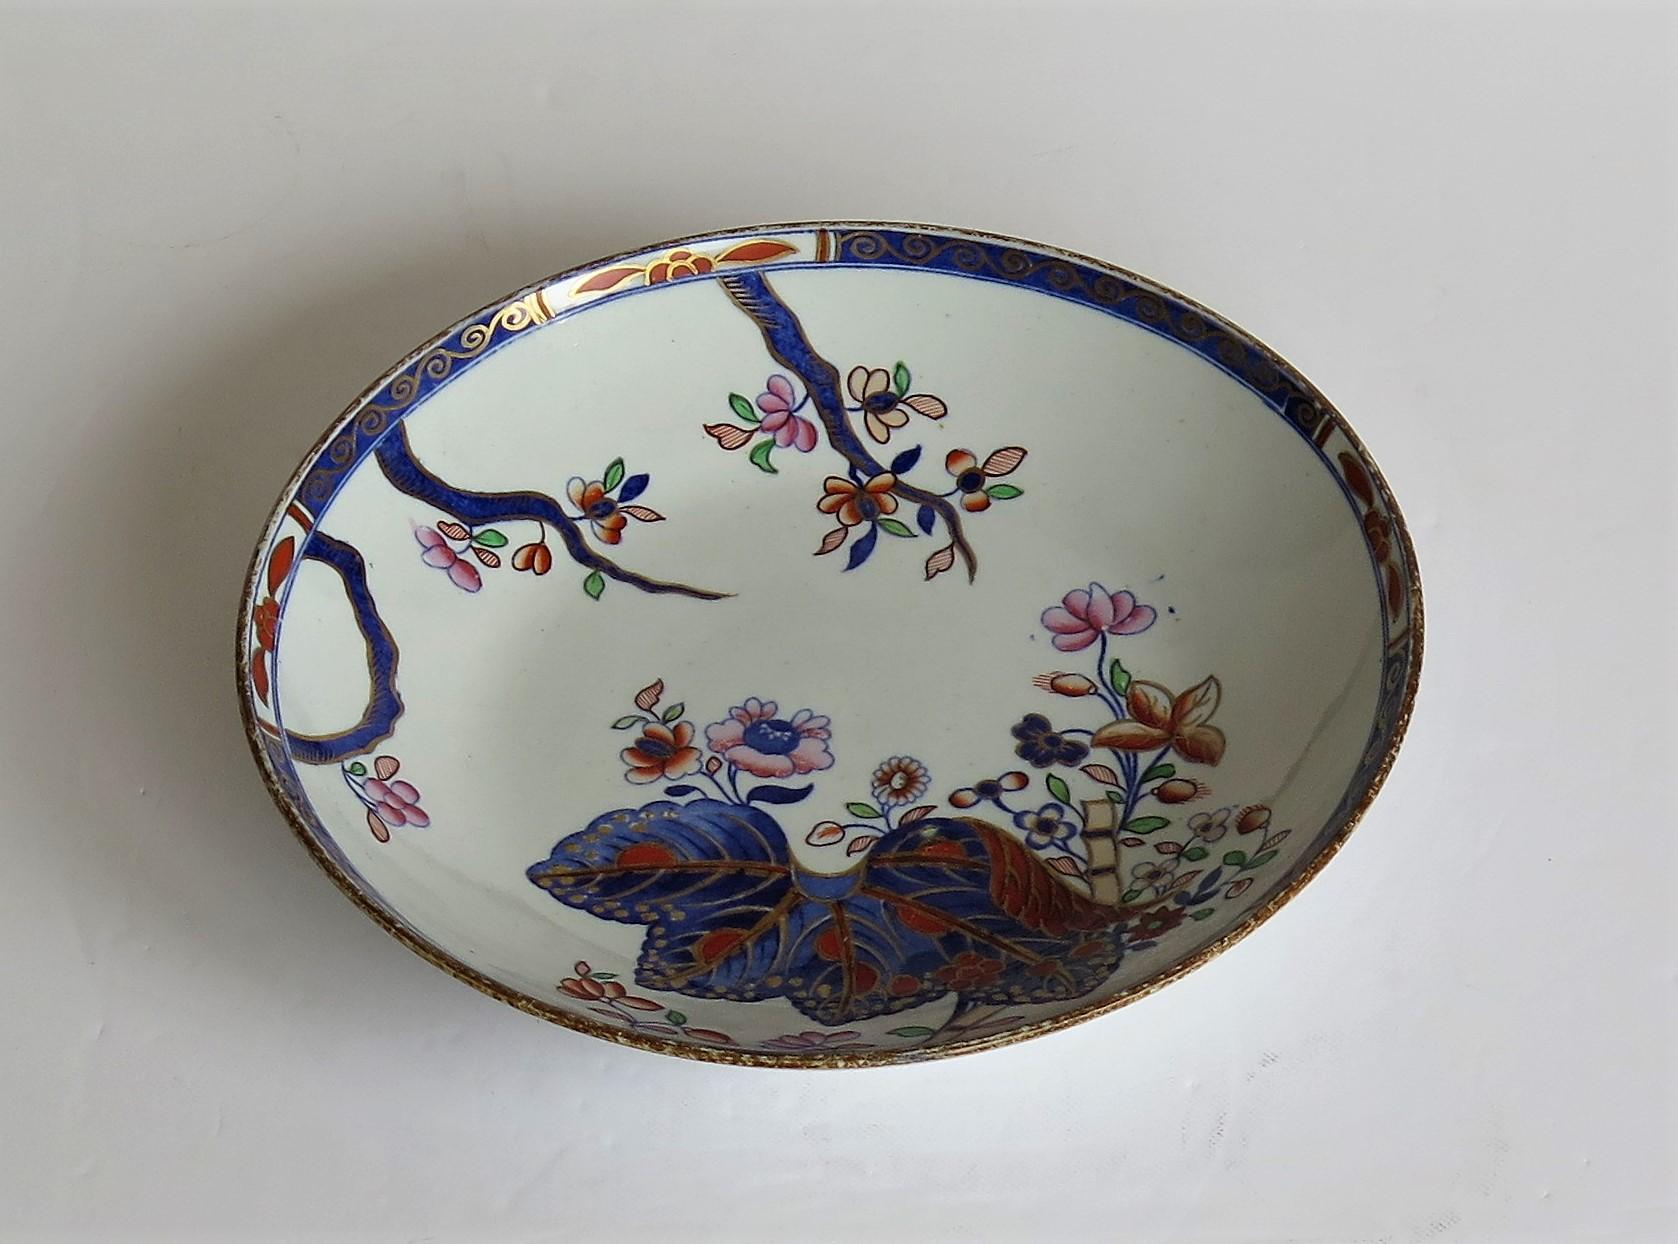 This is a very good porcelain deep plate or dish, hand painted in the tobacco leaf pattern, number 2061, made by the Spode factory, in the early 19th century, English Georgian period, circa 1810.

The dish is well potted on a low foot and